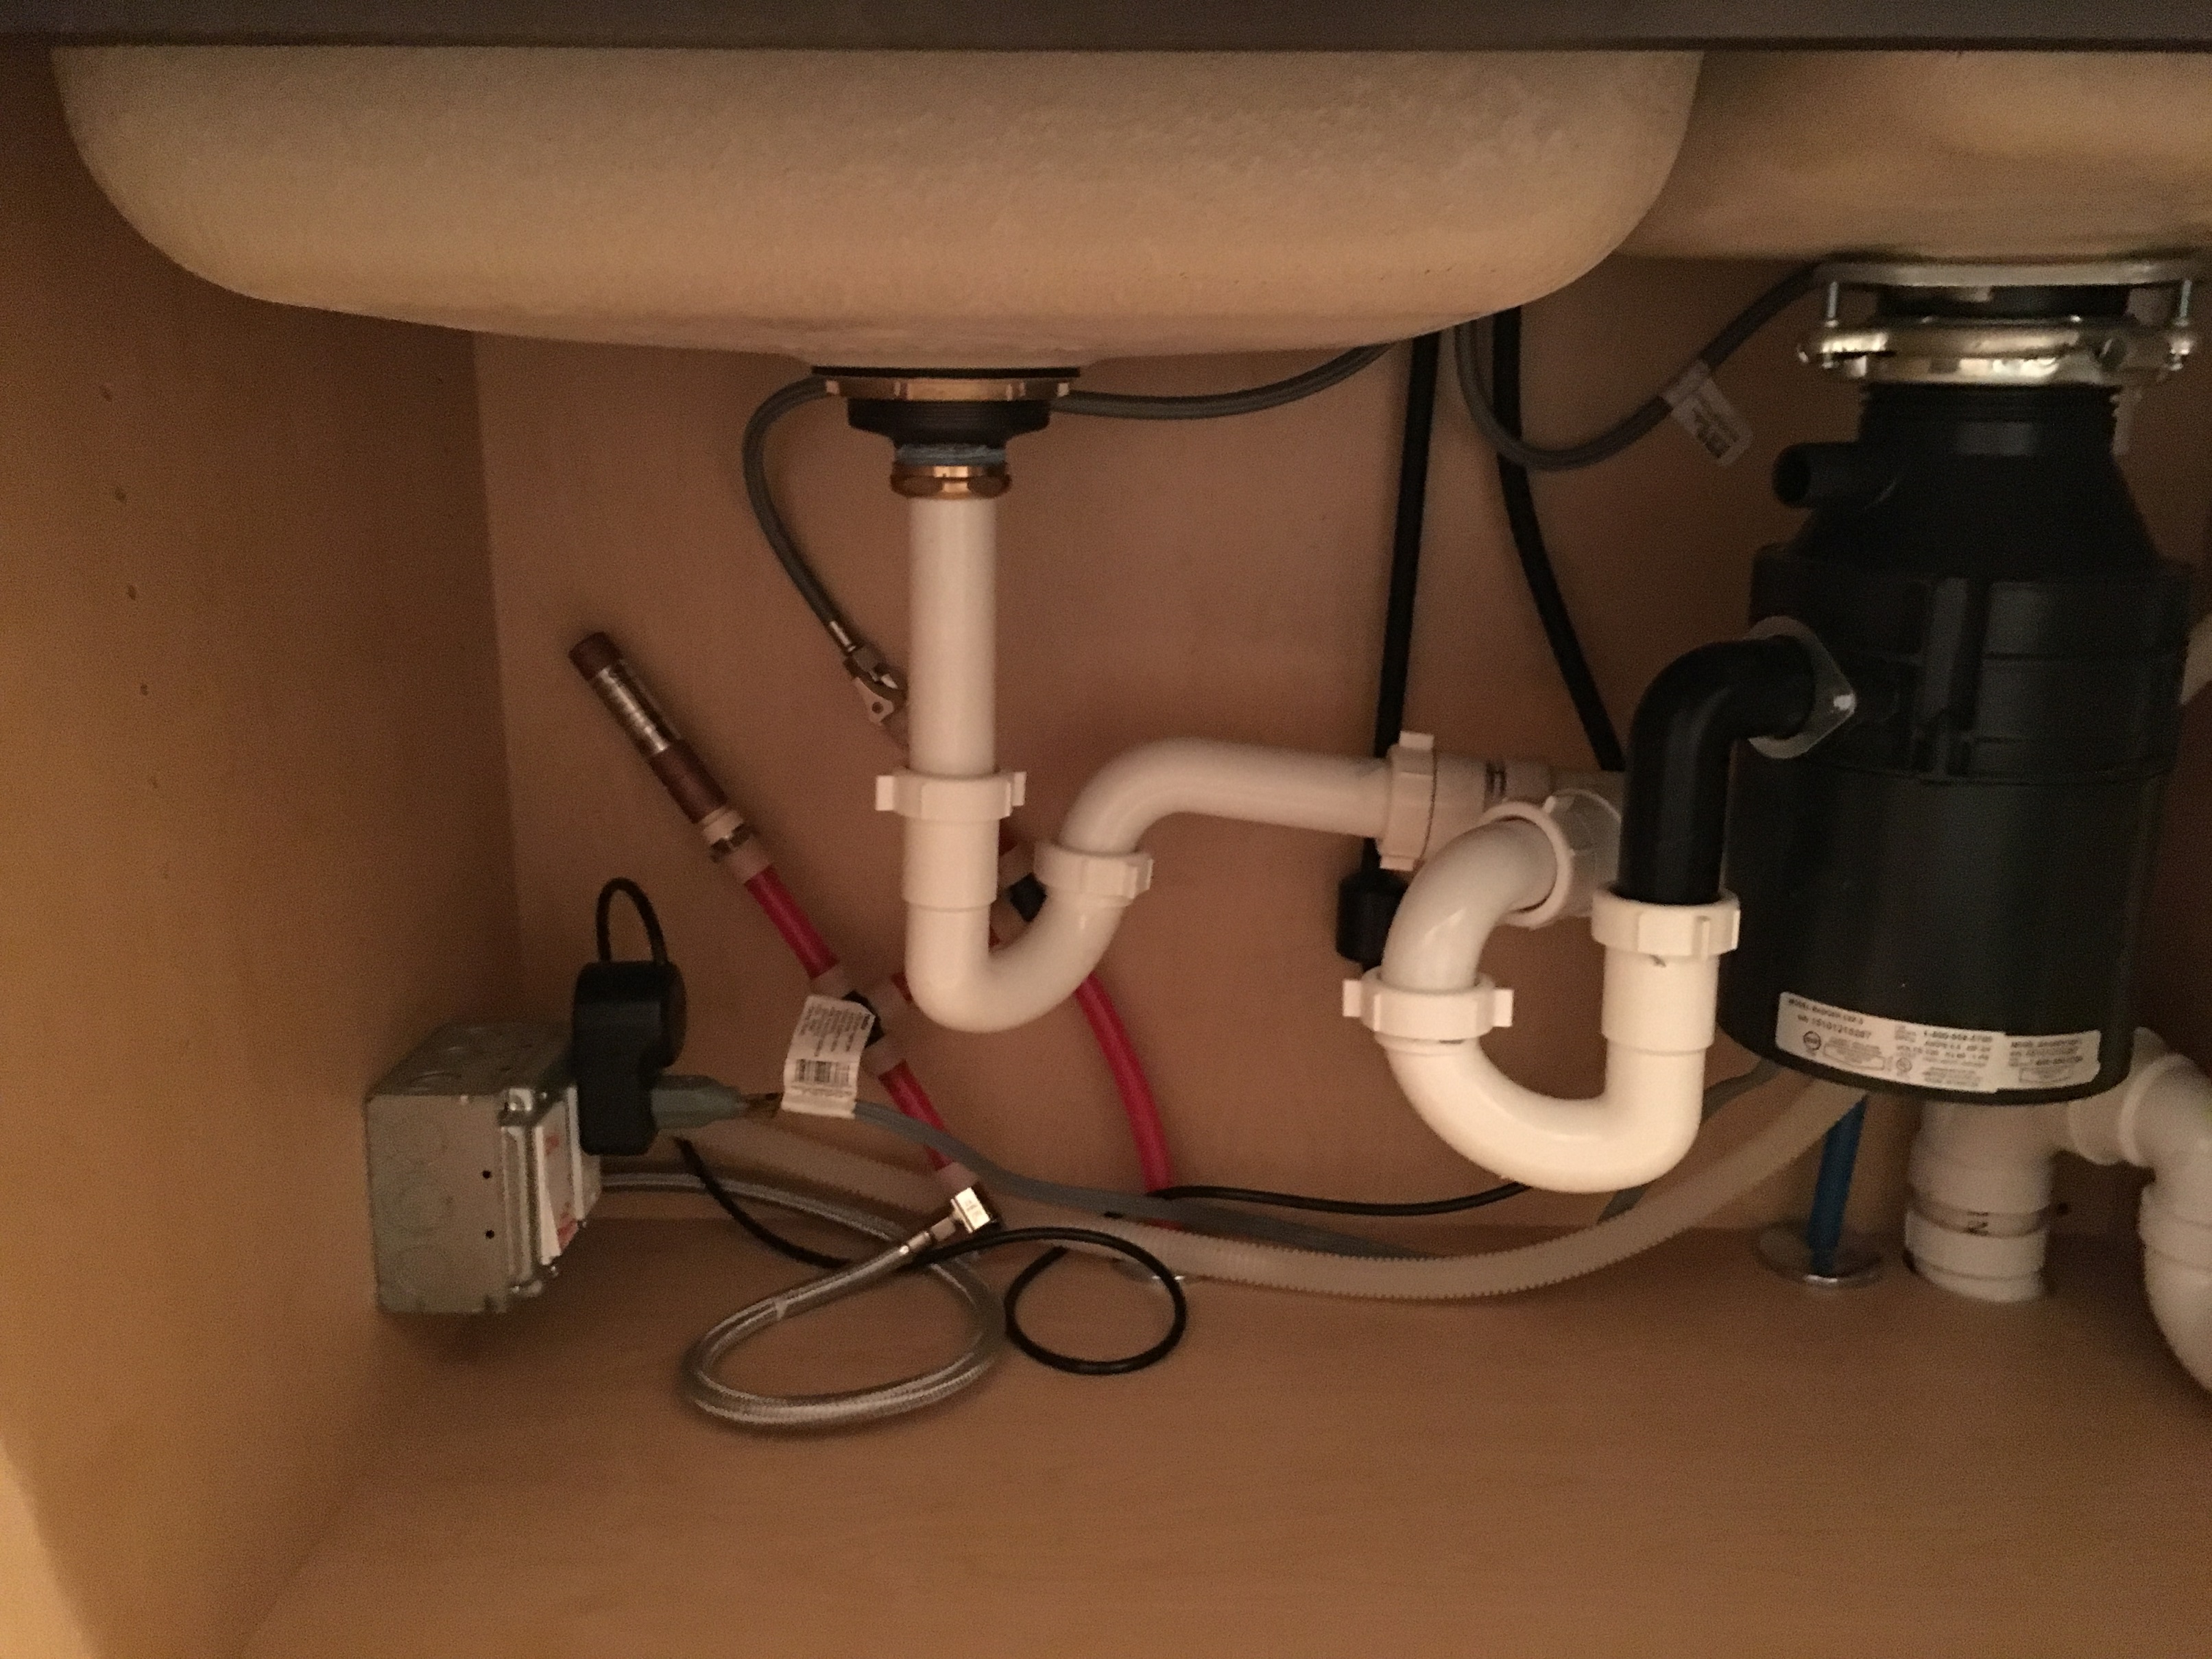 Sewer Gas Smell From Kitchen Sink Plumbing Issue Inspections